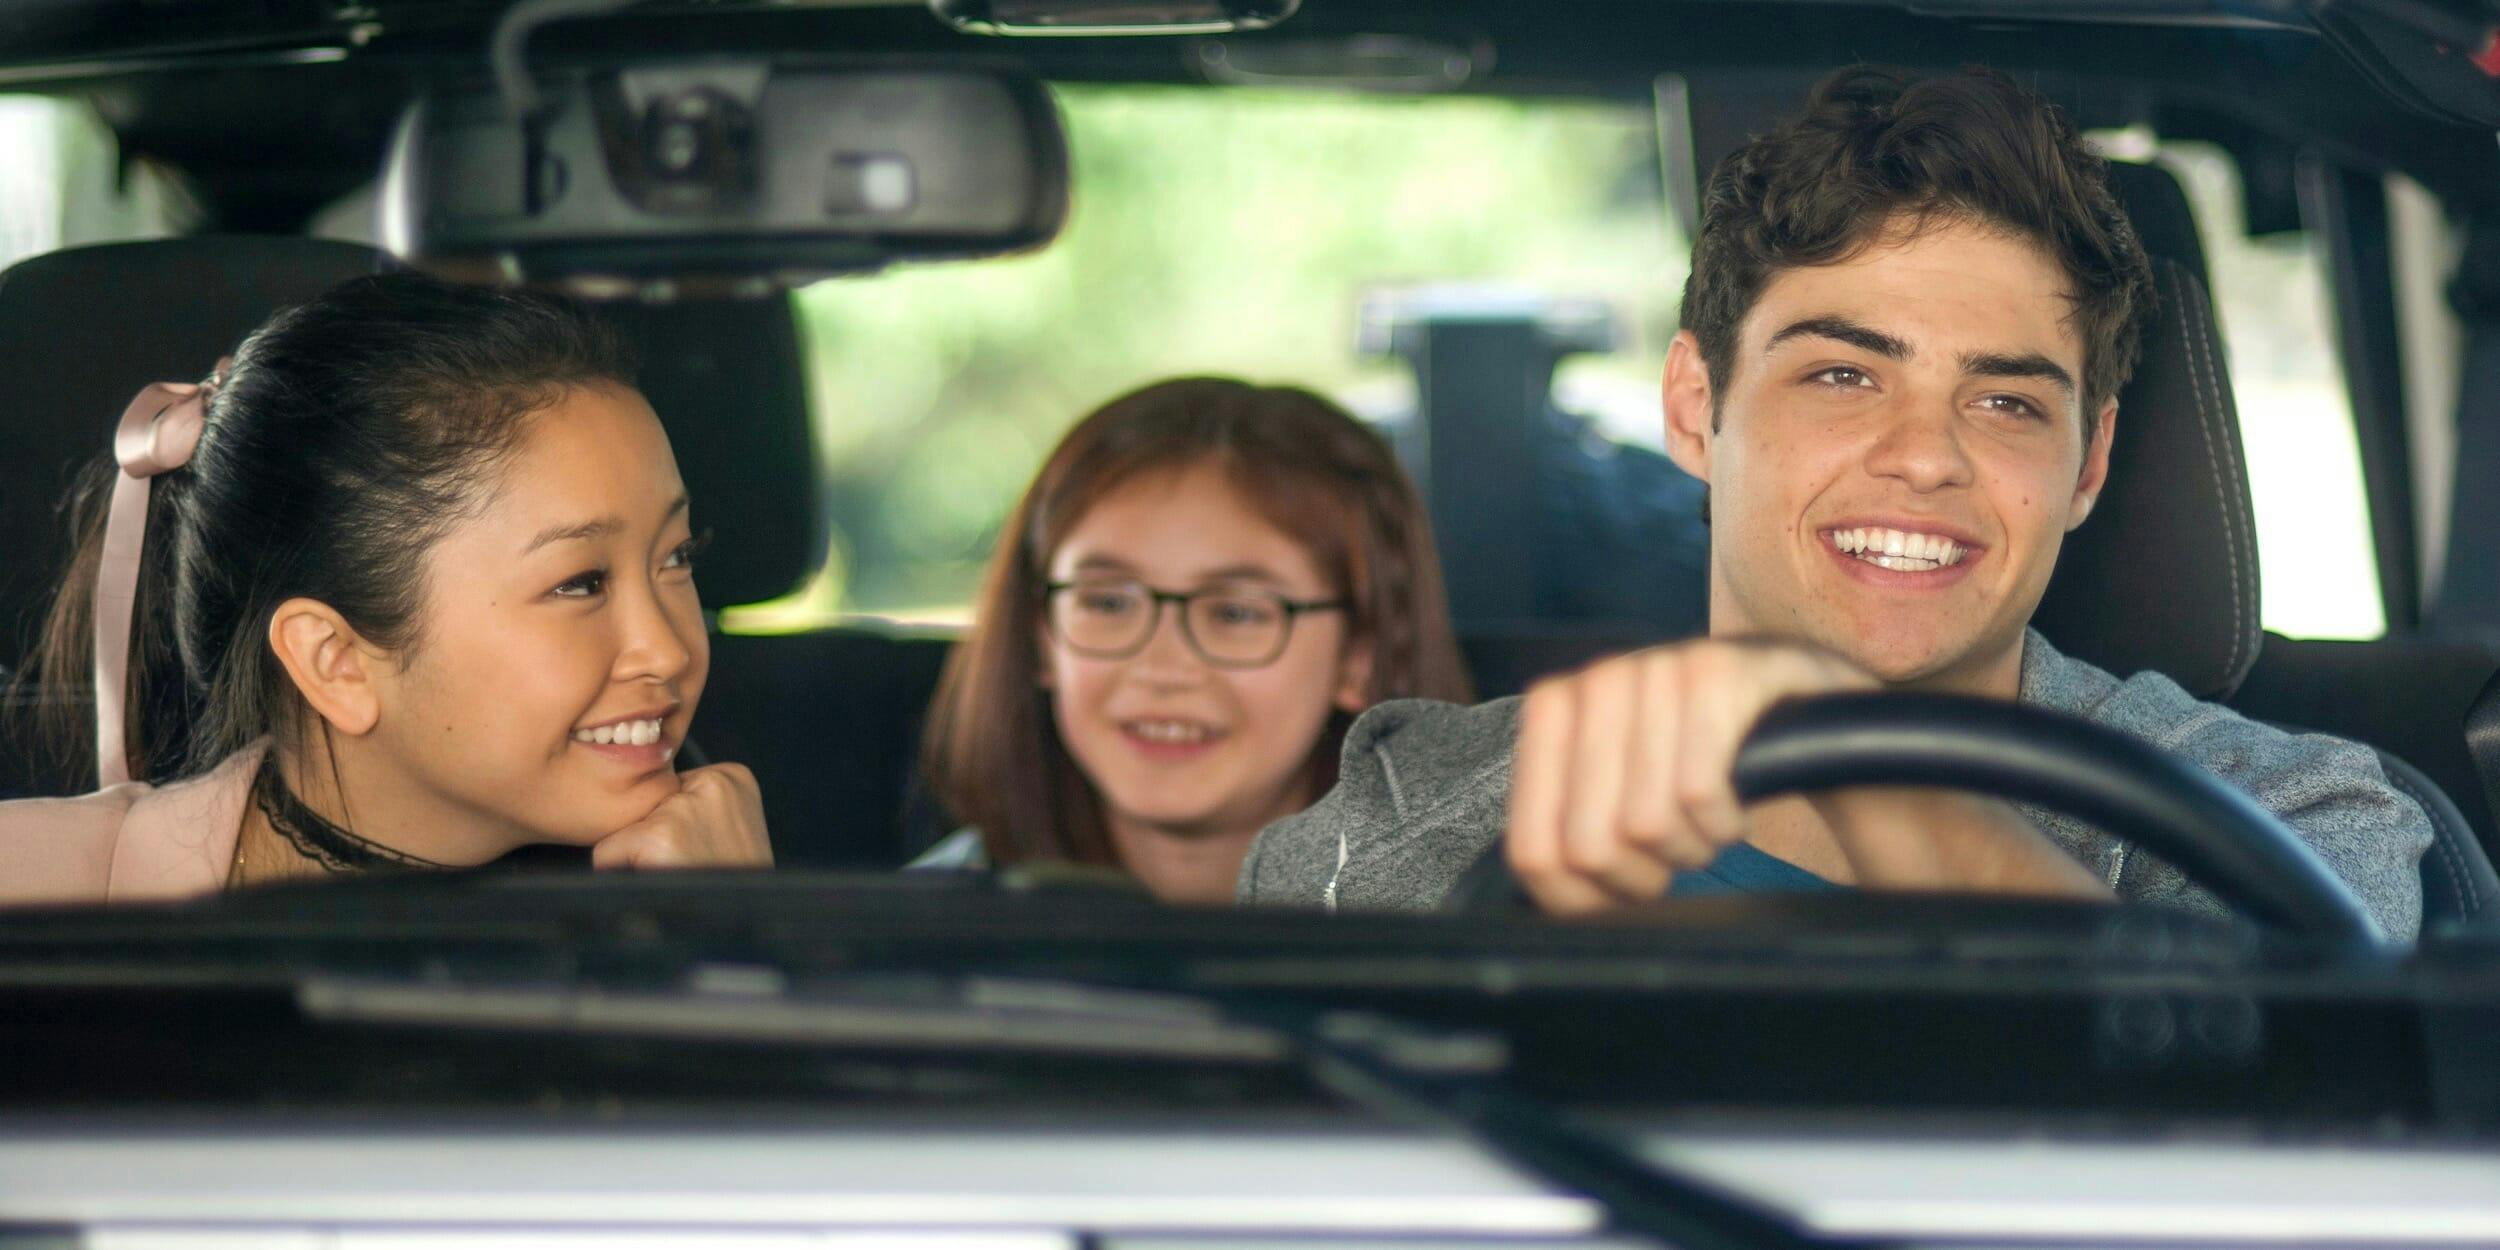 best rom-coms on Netflix - to all the boys I've loved before